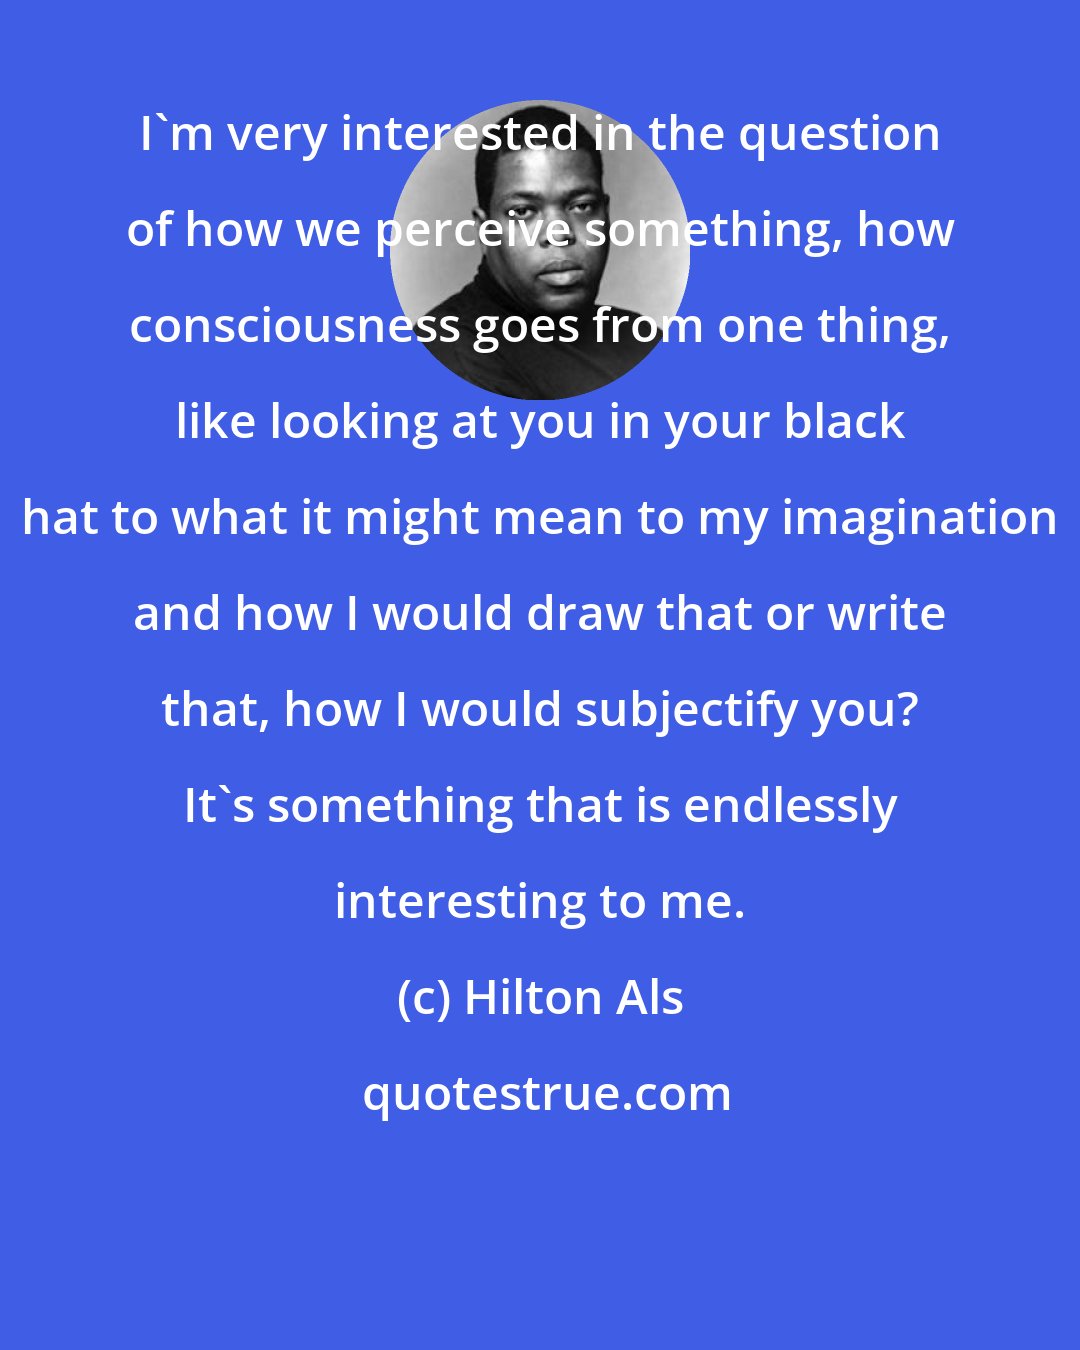 Hilton Als: I'm very interested in the question of how we perceive something, how consciousness goes from one thing, like looking at you in your black hat to what it might mean to my imagination and how I would draw that or write that, how I would subjectify you? It's something that is endlessly interesting to me.